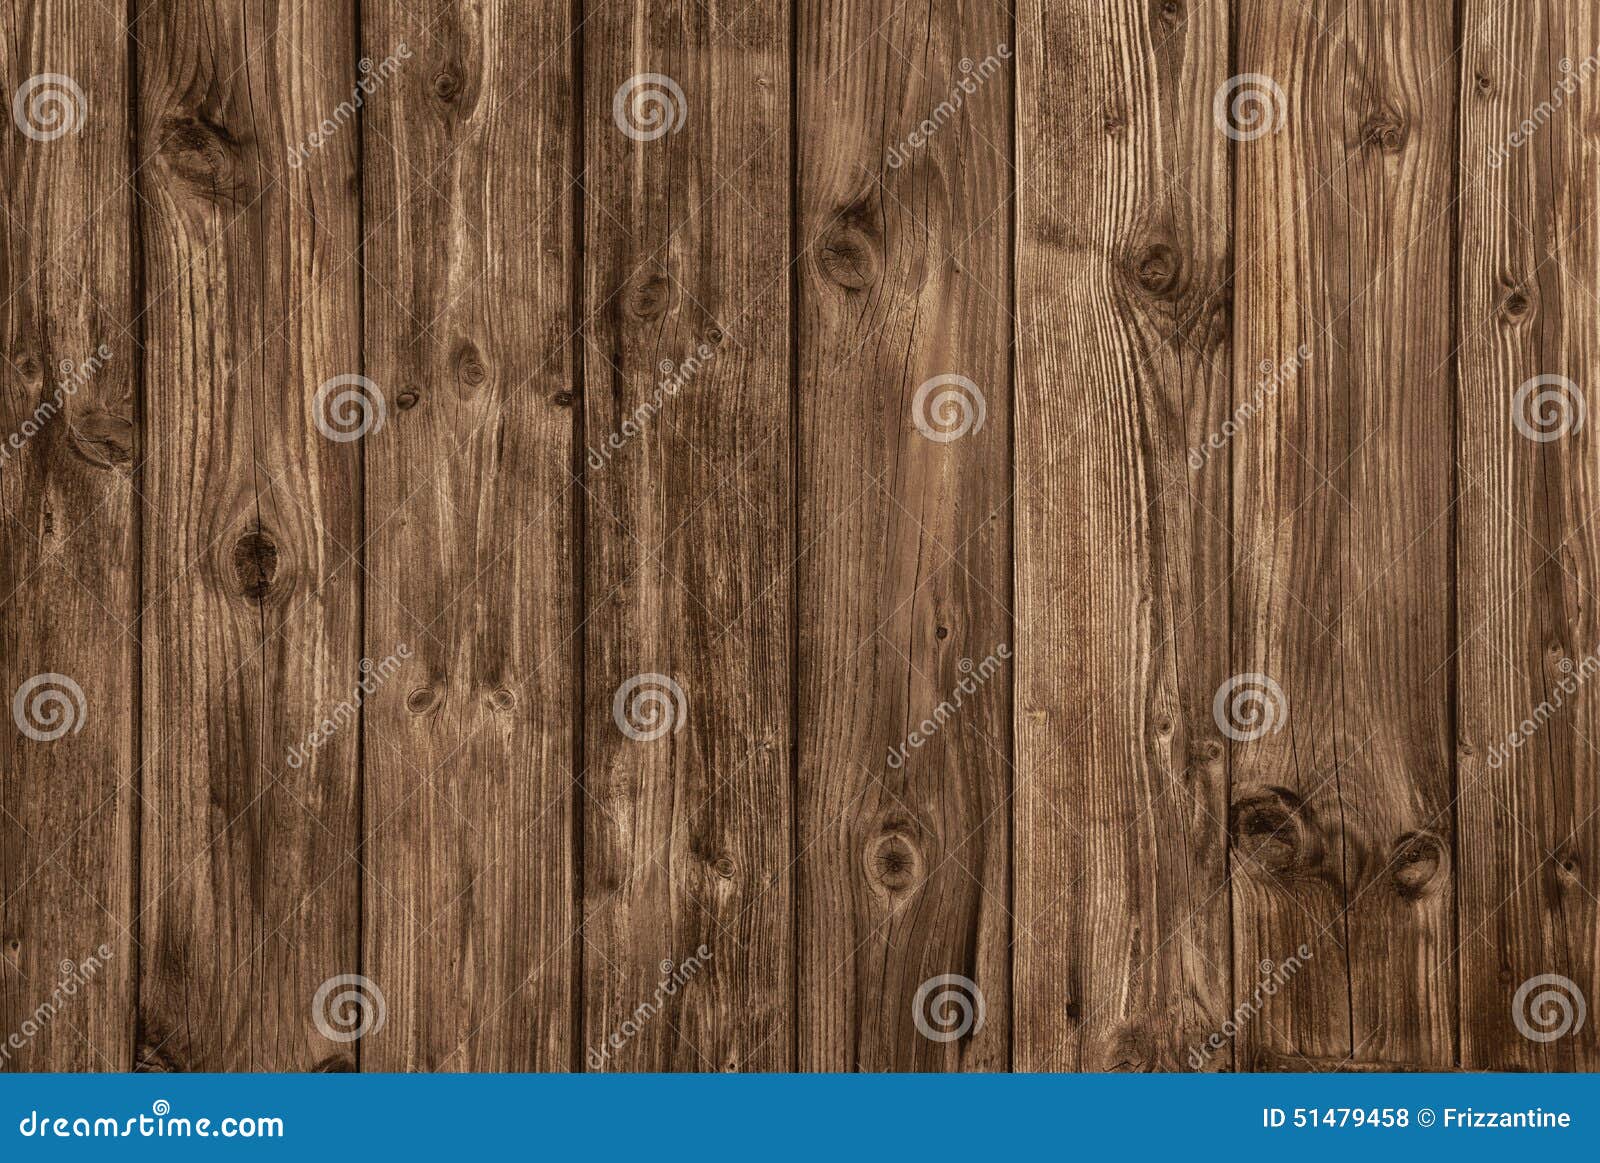 old wooden brown board - nobody and empty.